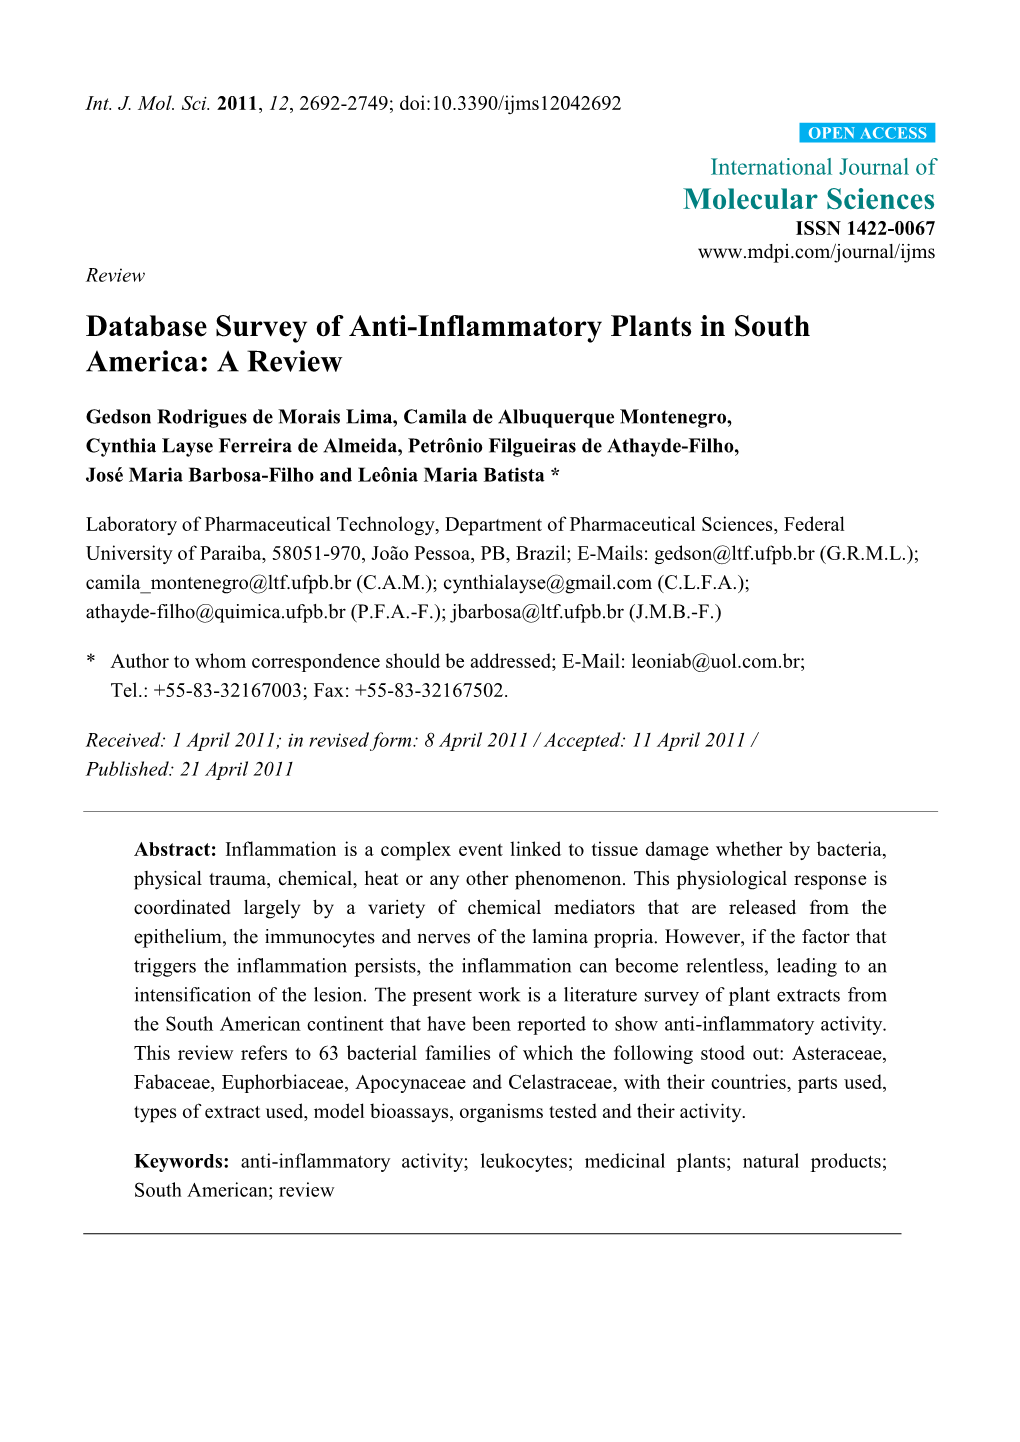 Database Survey of Anti-Inflammatory Plants in South America: a Review